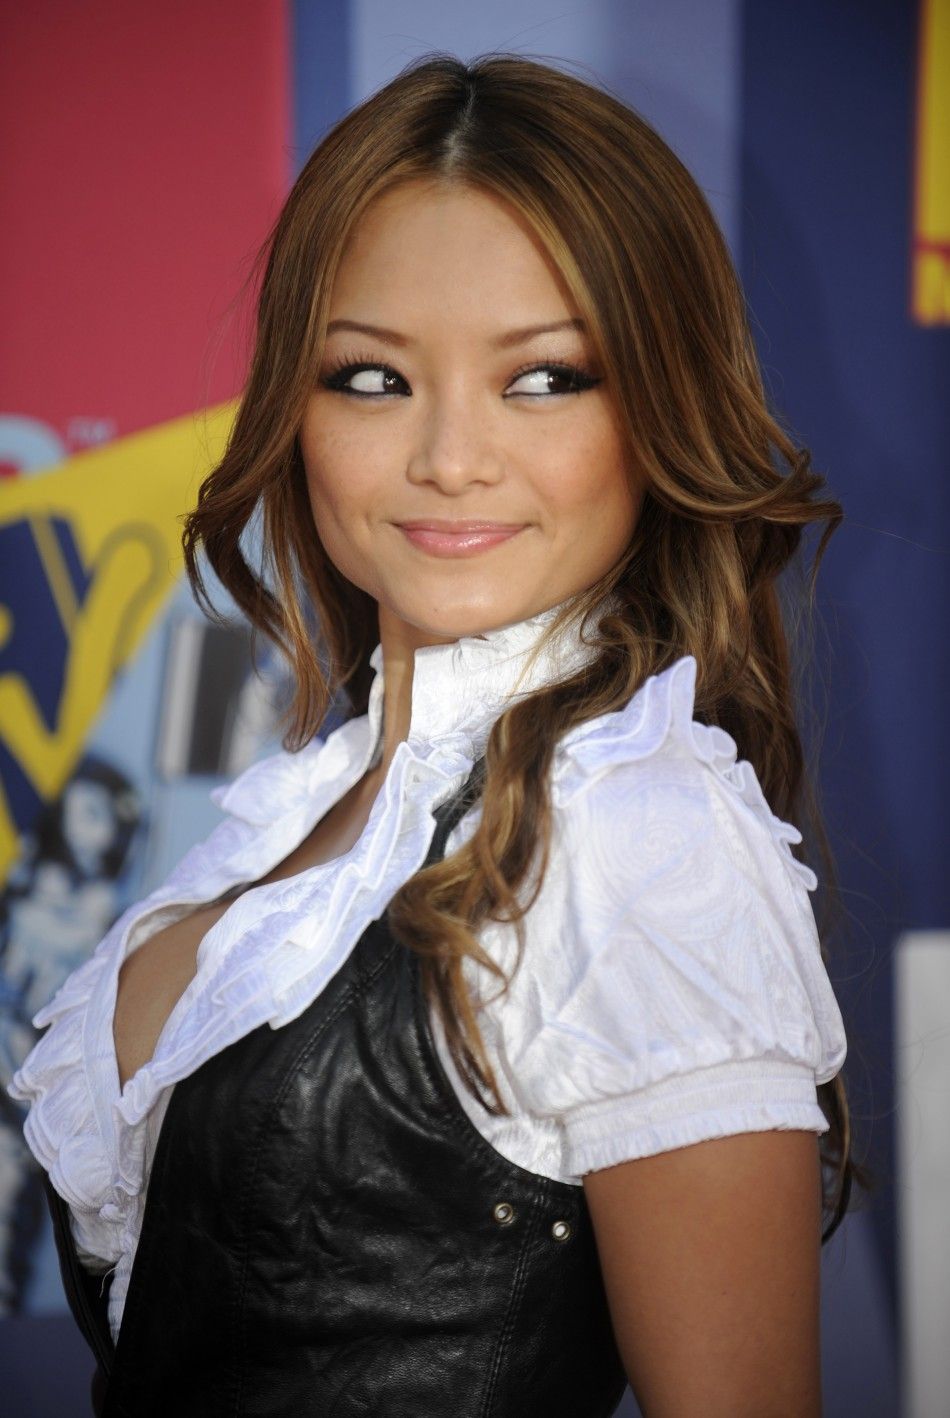 Tila Tequila News: Rehab to Follow Suicide Attempt | IBTimes